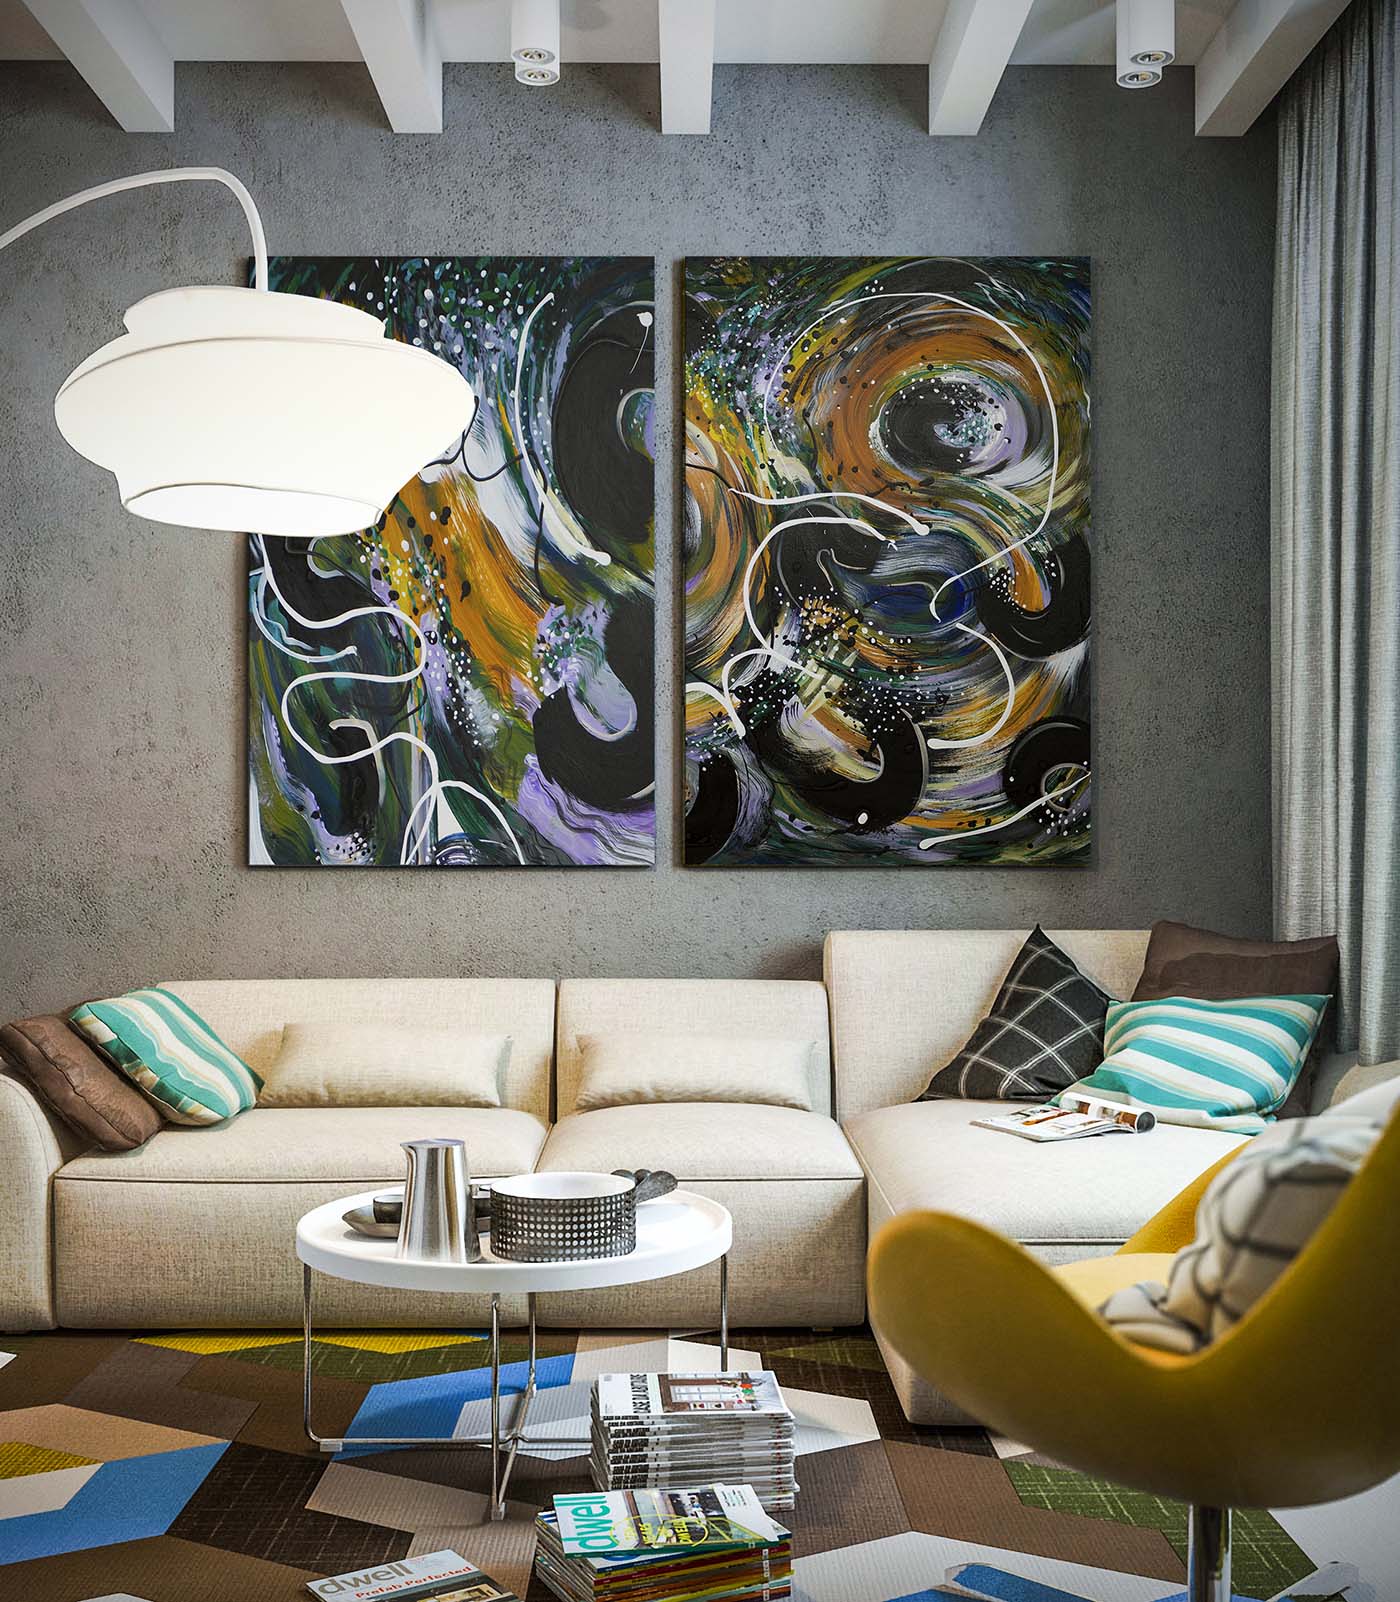 Silkworm Abstract painting by Doug LaRue in 2 panels over a couch in a living room